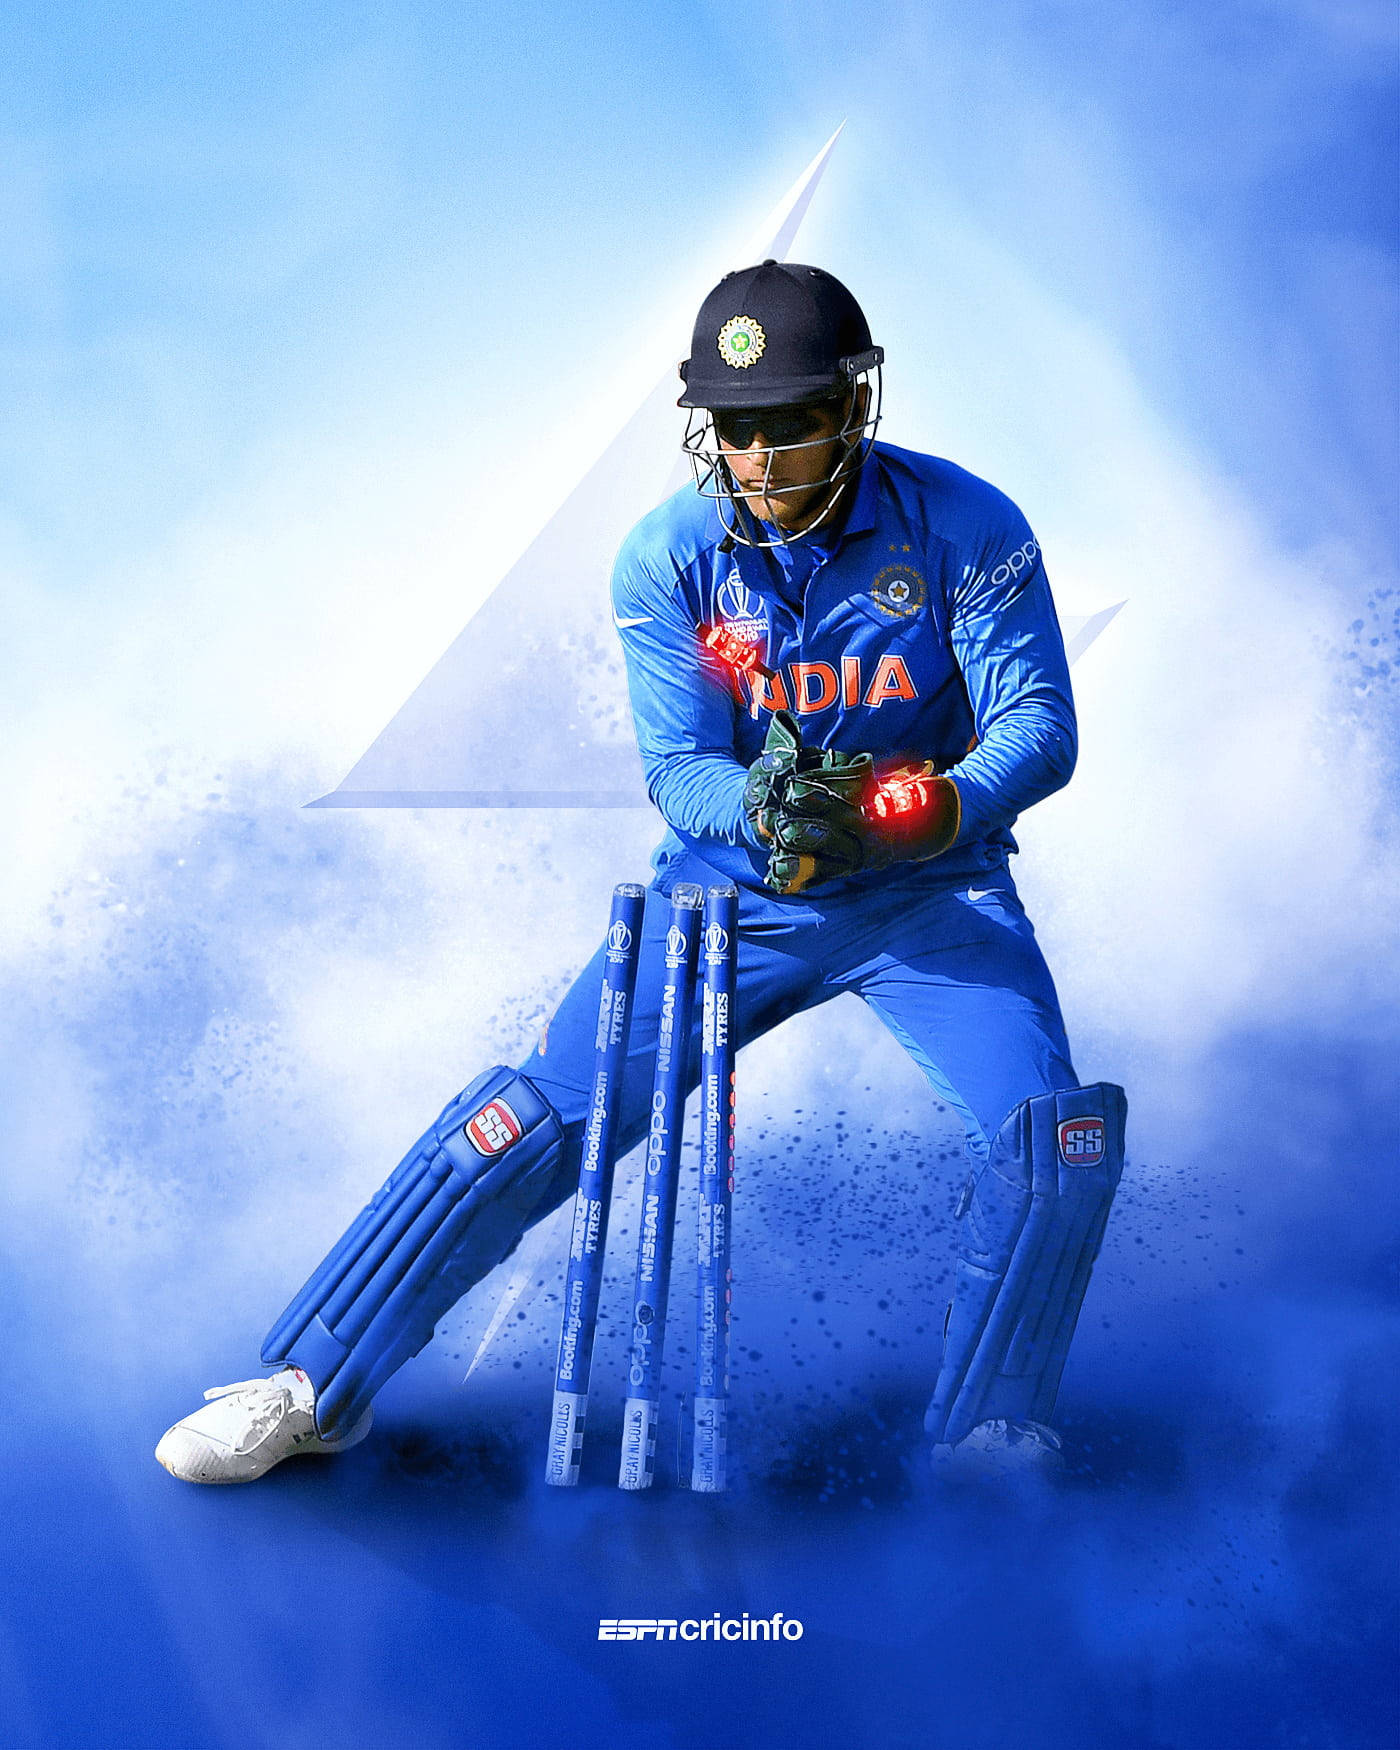 Free Dhoni 7 Wallpaper Downloads 100 Dhoni 7 Wallpapers for FREE   Wallpaperscom